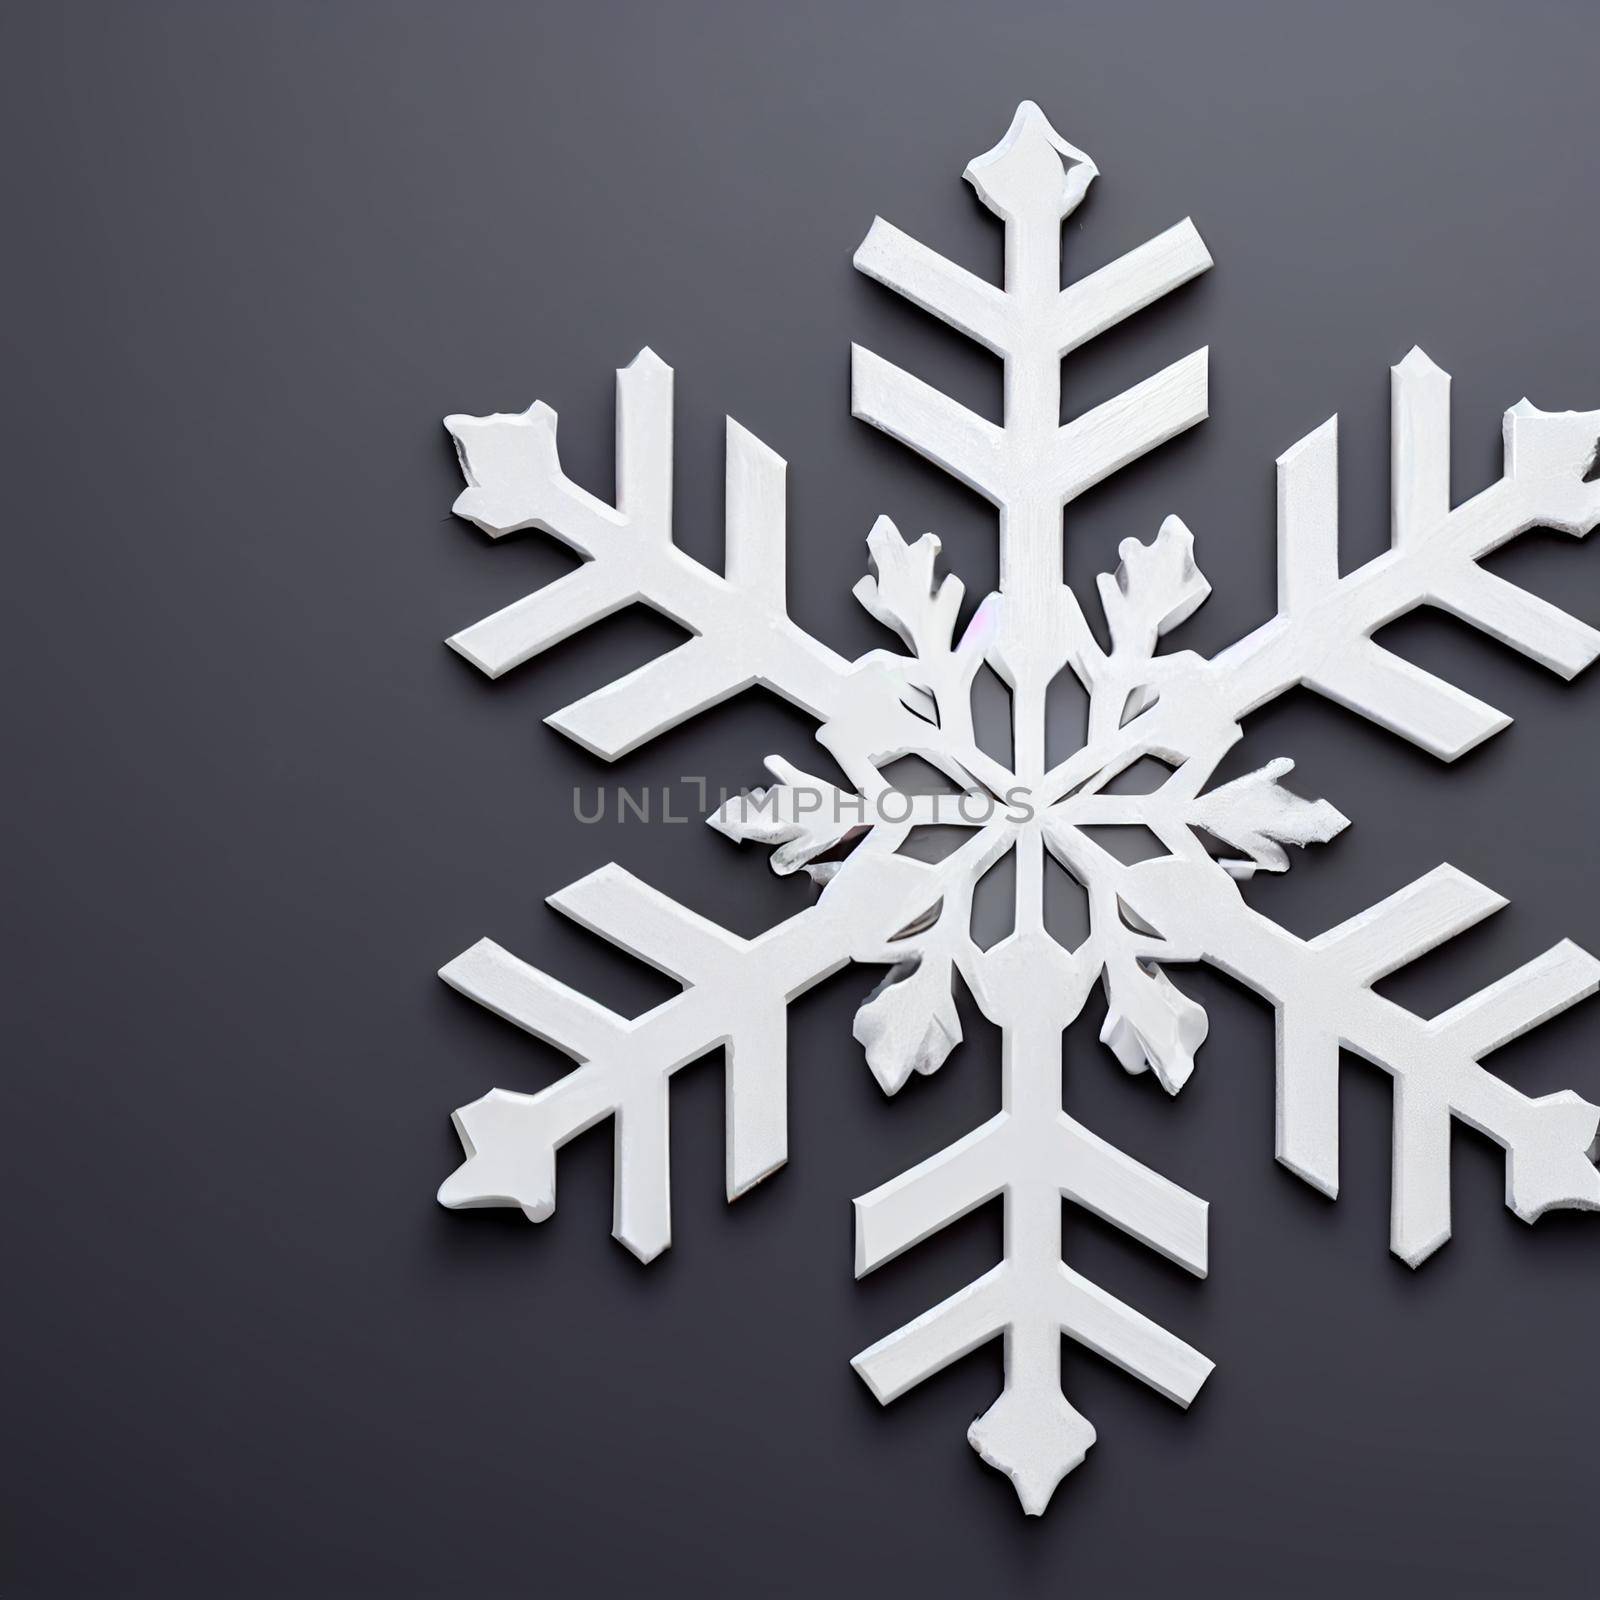 Design image of a snowflake by NeuroSky